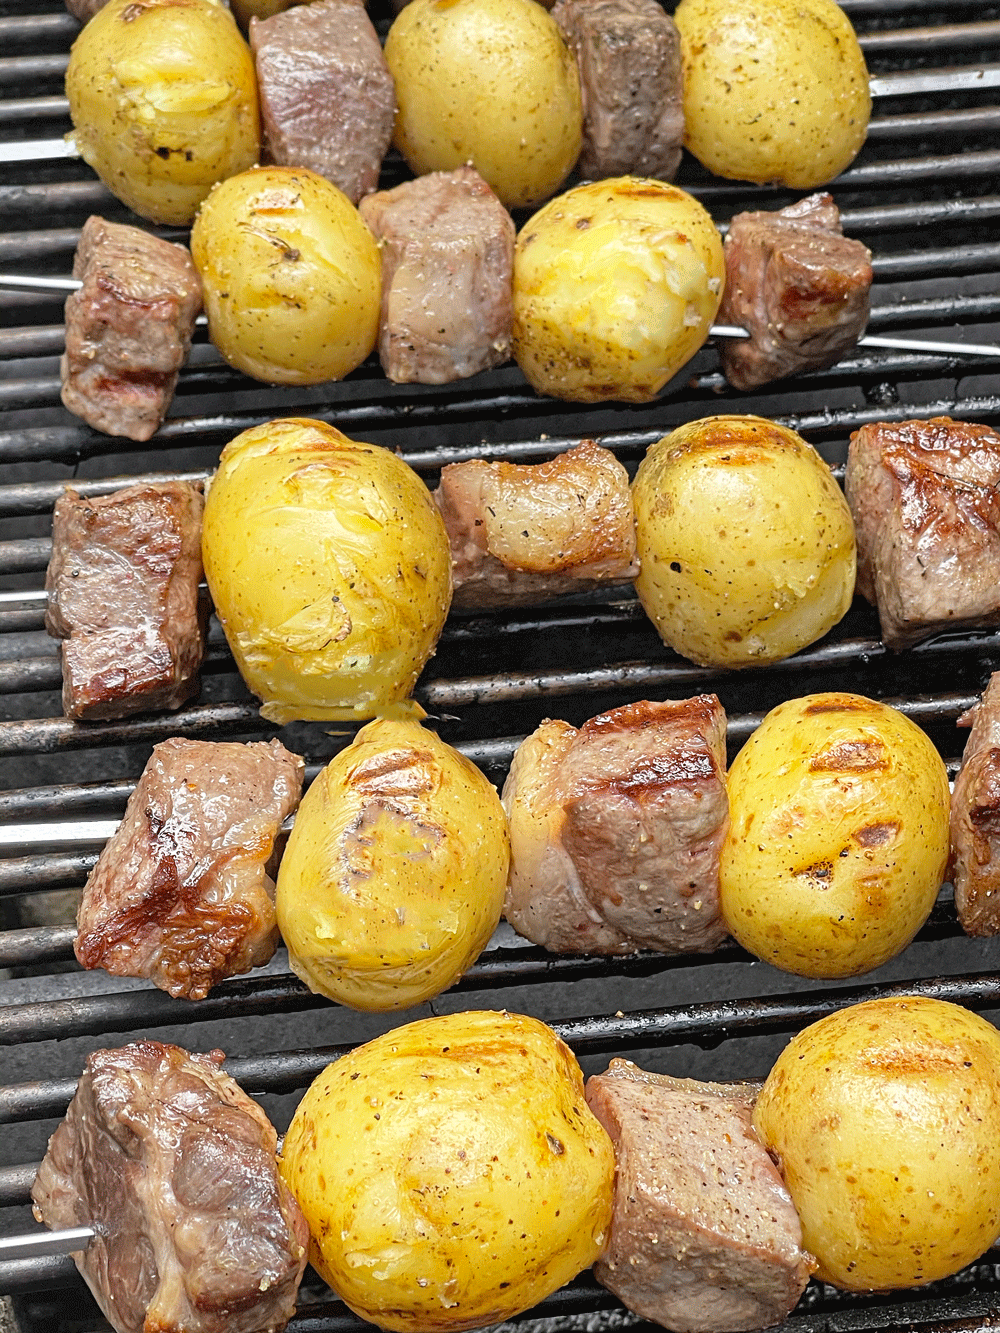 How To Make The Best Grilled Steak and Potato Skewers. This is an easy summer cook out recipe for a bbq. Perfect recipe for a crowd or even just a backyard grilling recipe for your family. Happy Grilling! www.ChopHappy.com #steakskewers #SteakandPotatoes